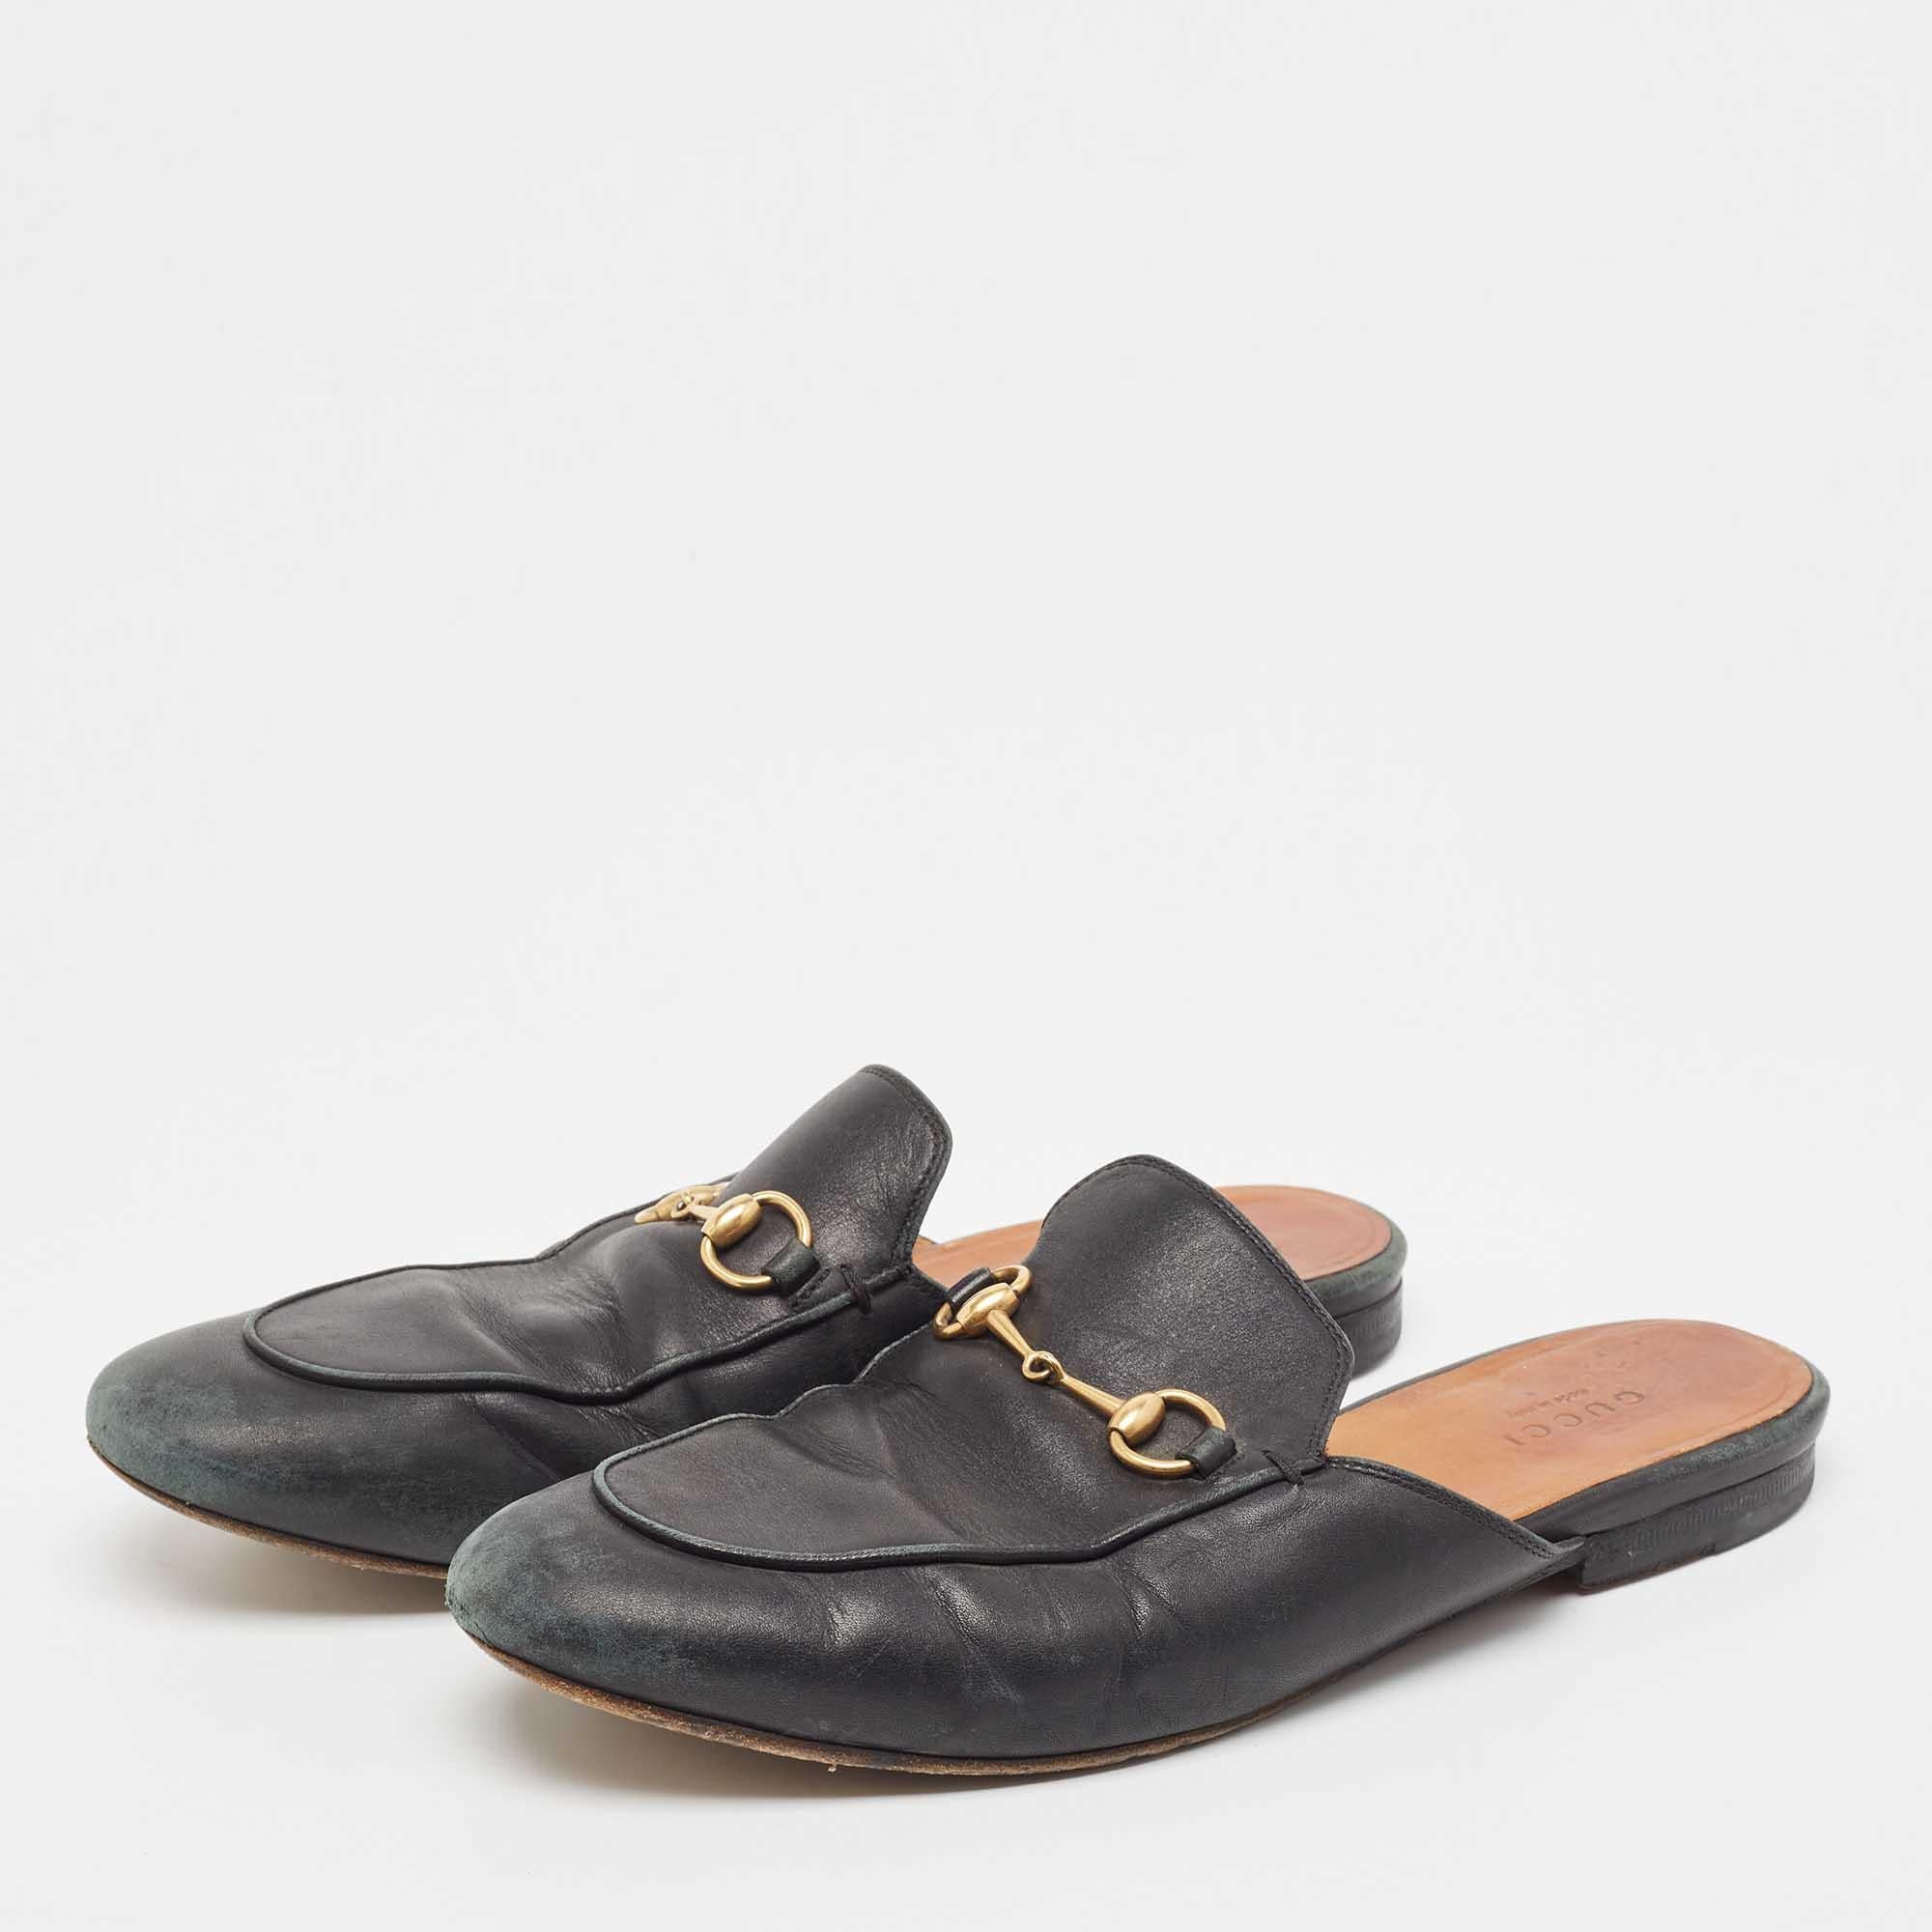 A perfect blend of luxury, style, and comfort, these Gucci mules are made using quality materials and will elegantly frame your feet. They can be paired with a host of outfits from your wardrobe.

